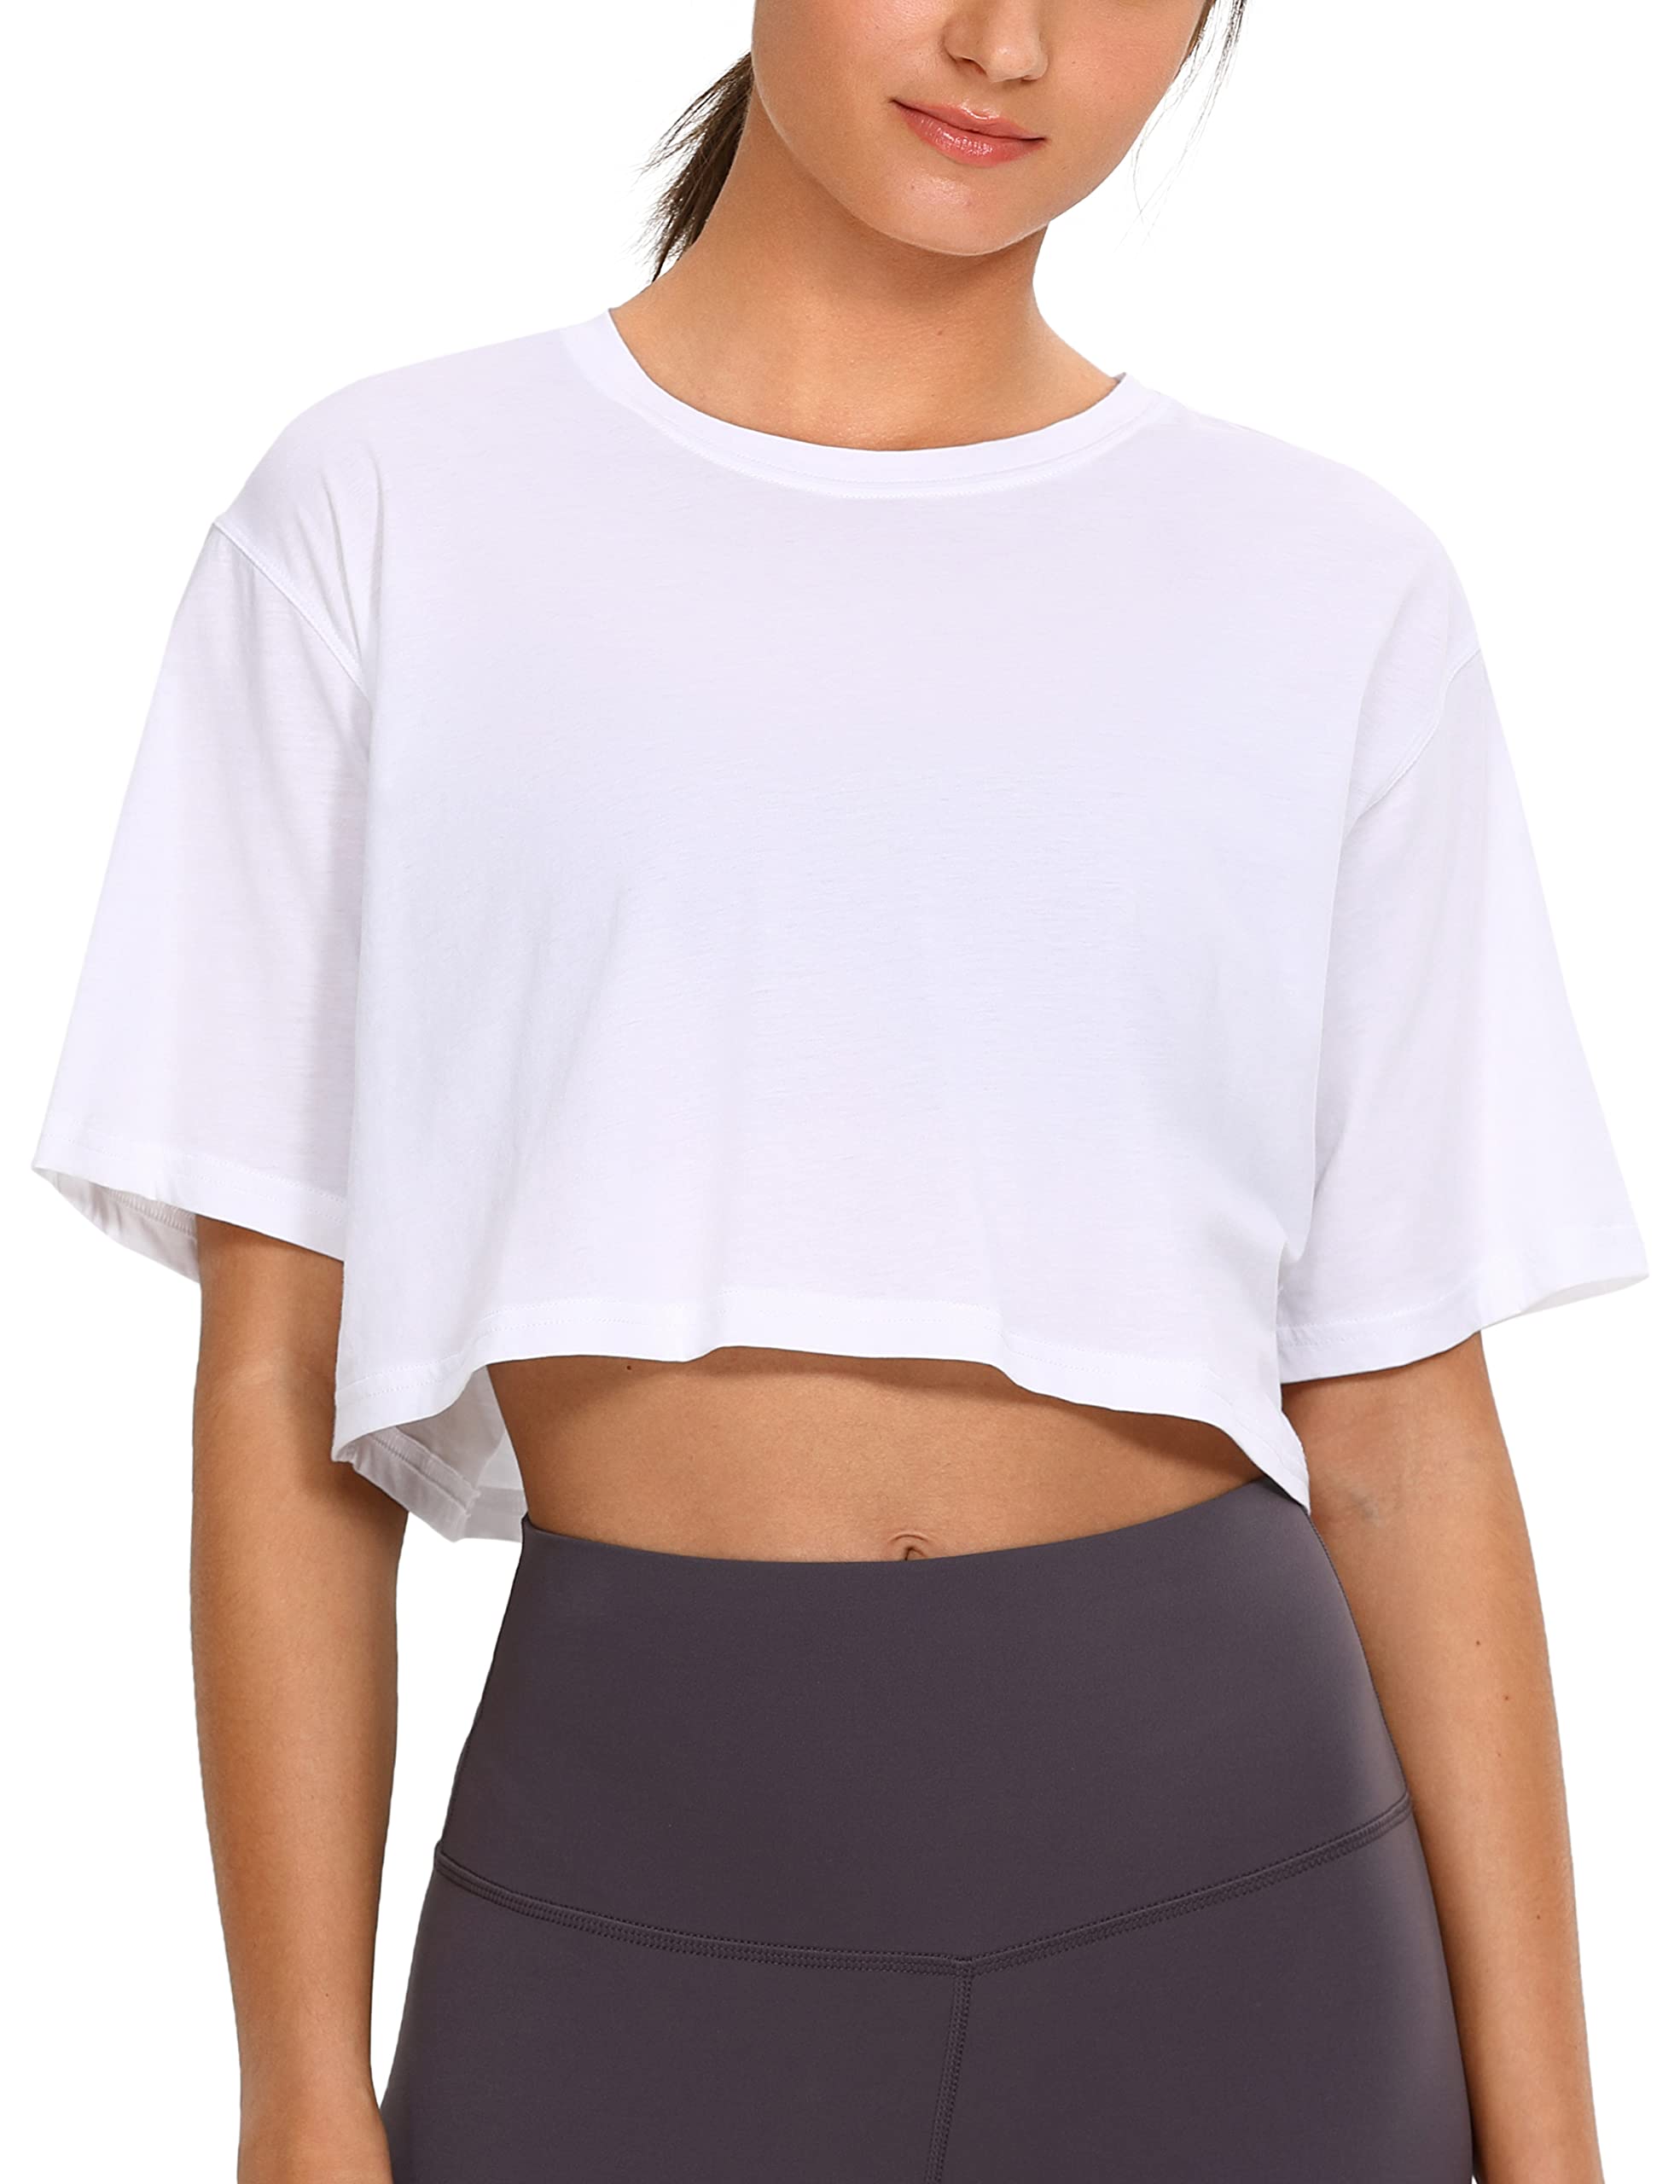 CRZ YOGA Women's Long Sleeve Crop Top Quick Dry Cropped Workout